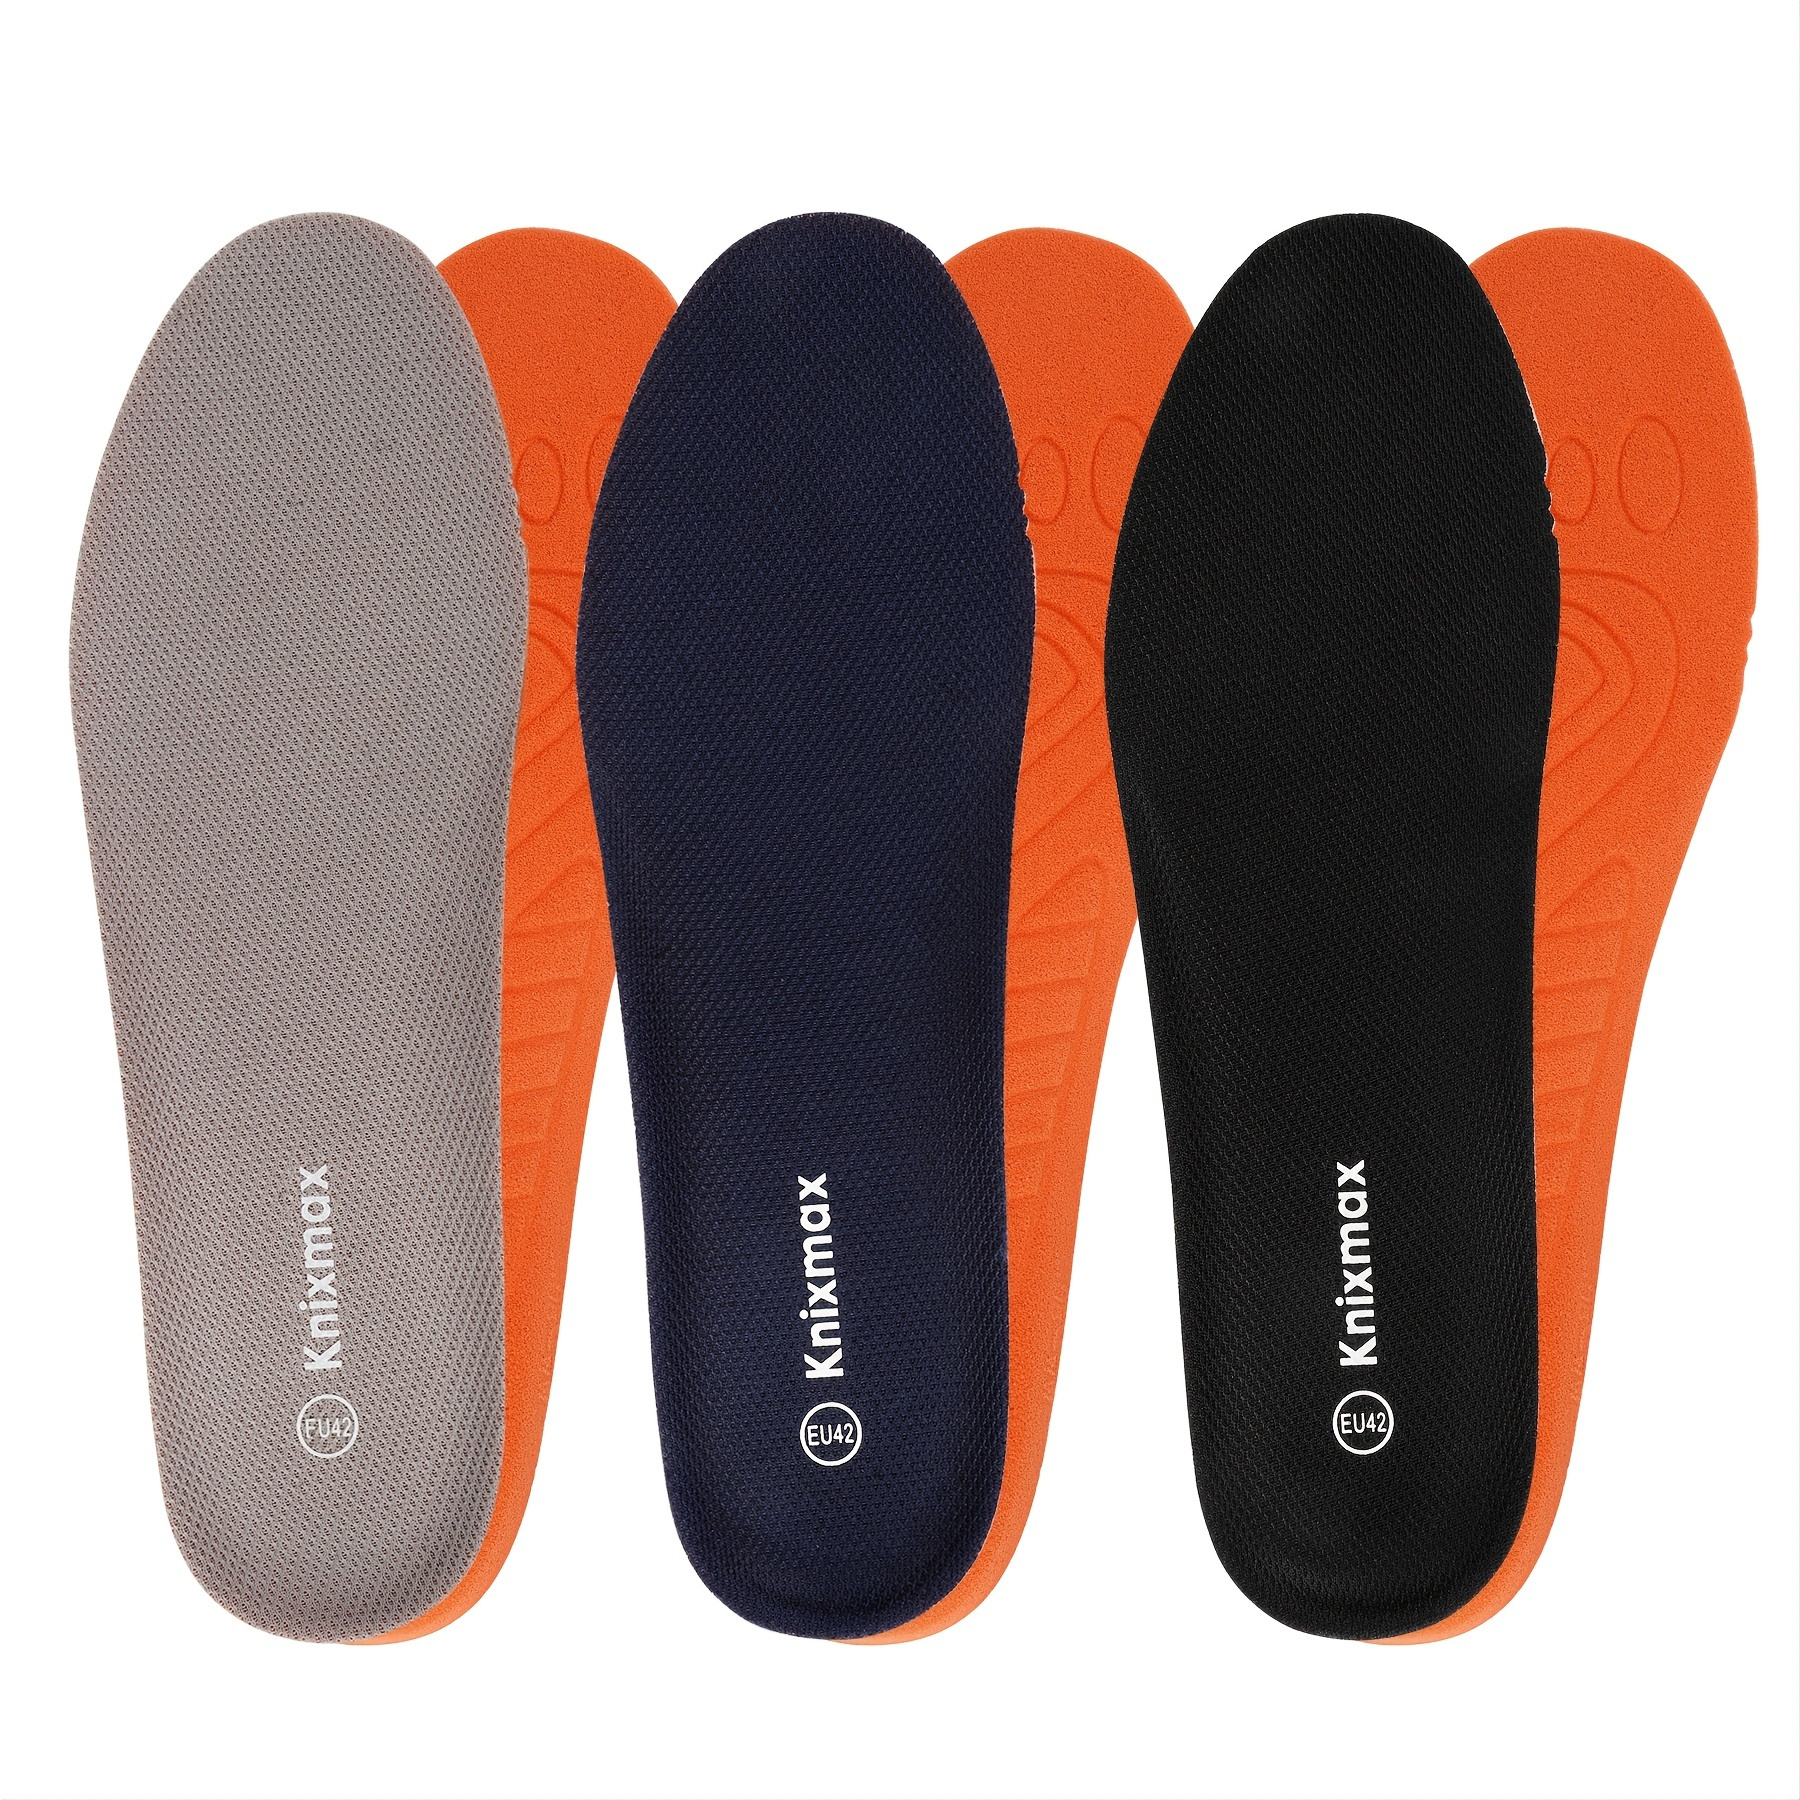 

3 Pairs Knixmax Sports Insoles Arch Support Full Length Orthotic Inserts For Men Women